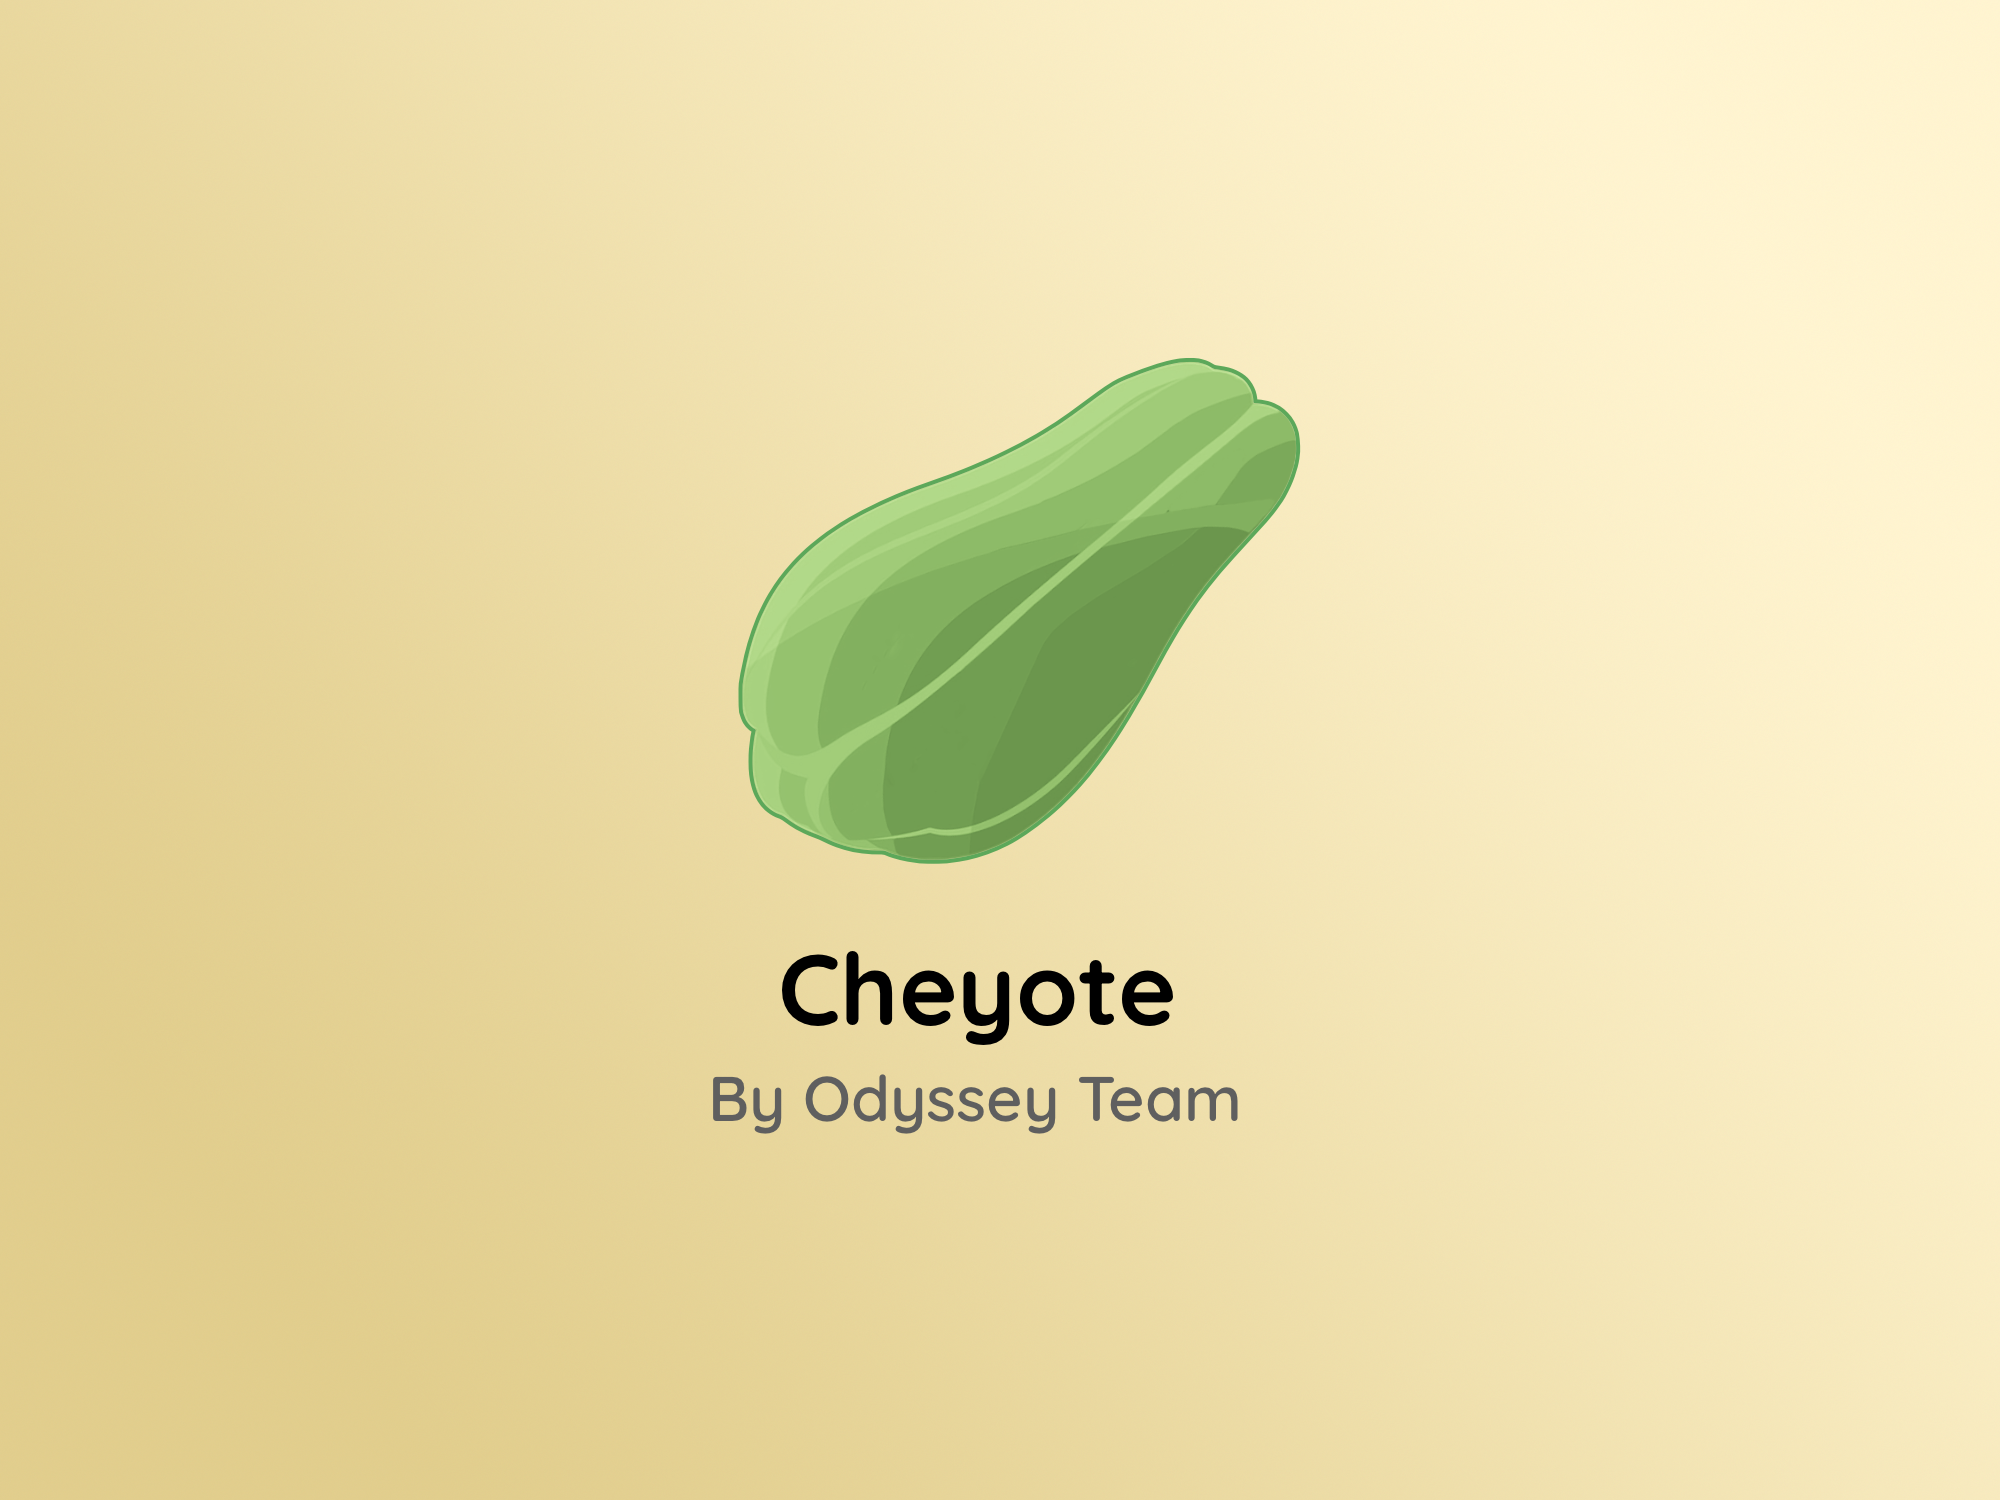 The Cheyote jailbreak for iOS 15.0-15.1.1 by the Odyssey Team.